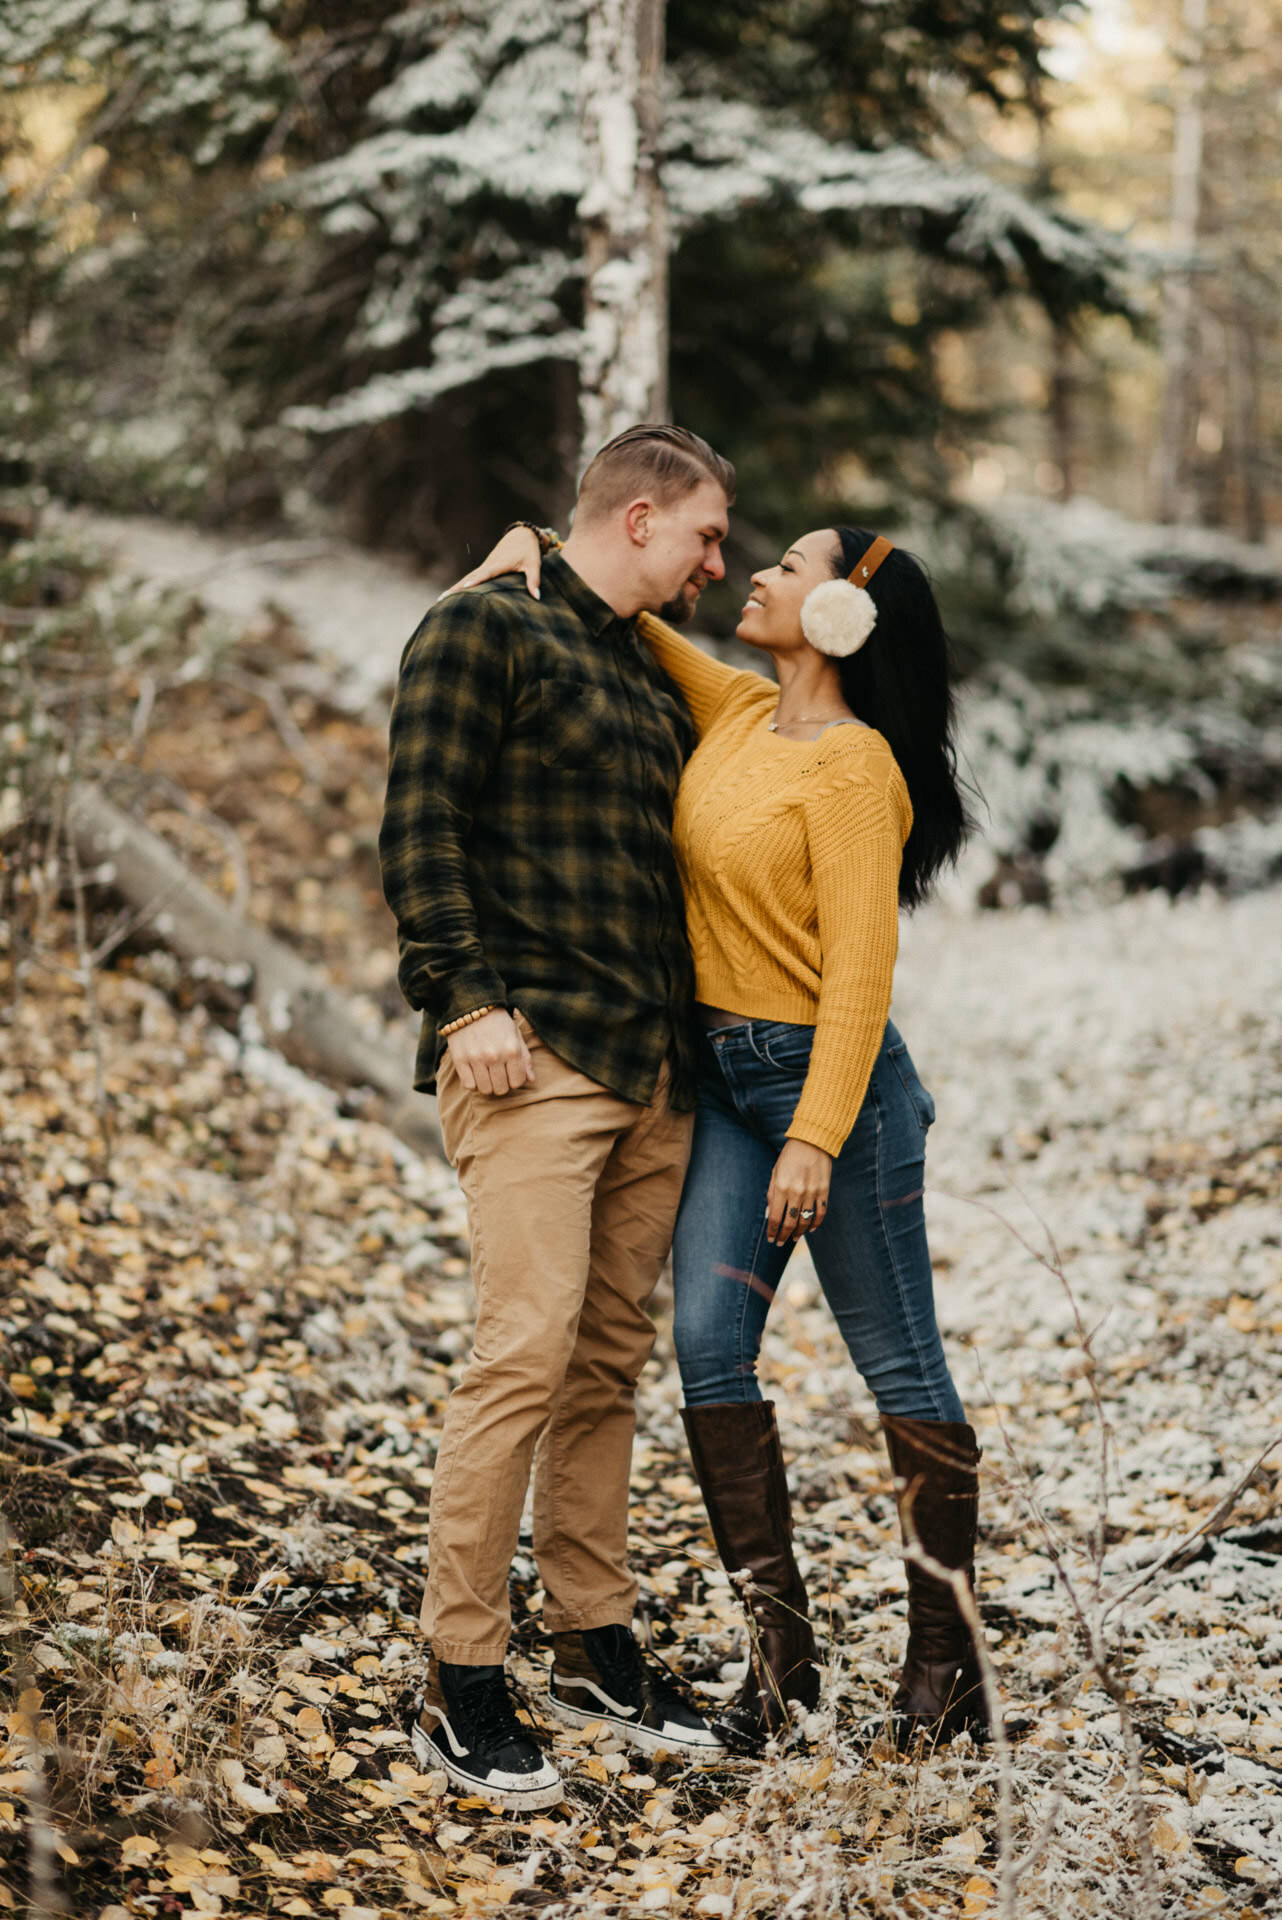 kelsey-rob-snowy-fall-leaves-evergreen-colorado-engagement-session-7.jpg